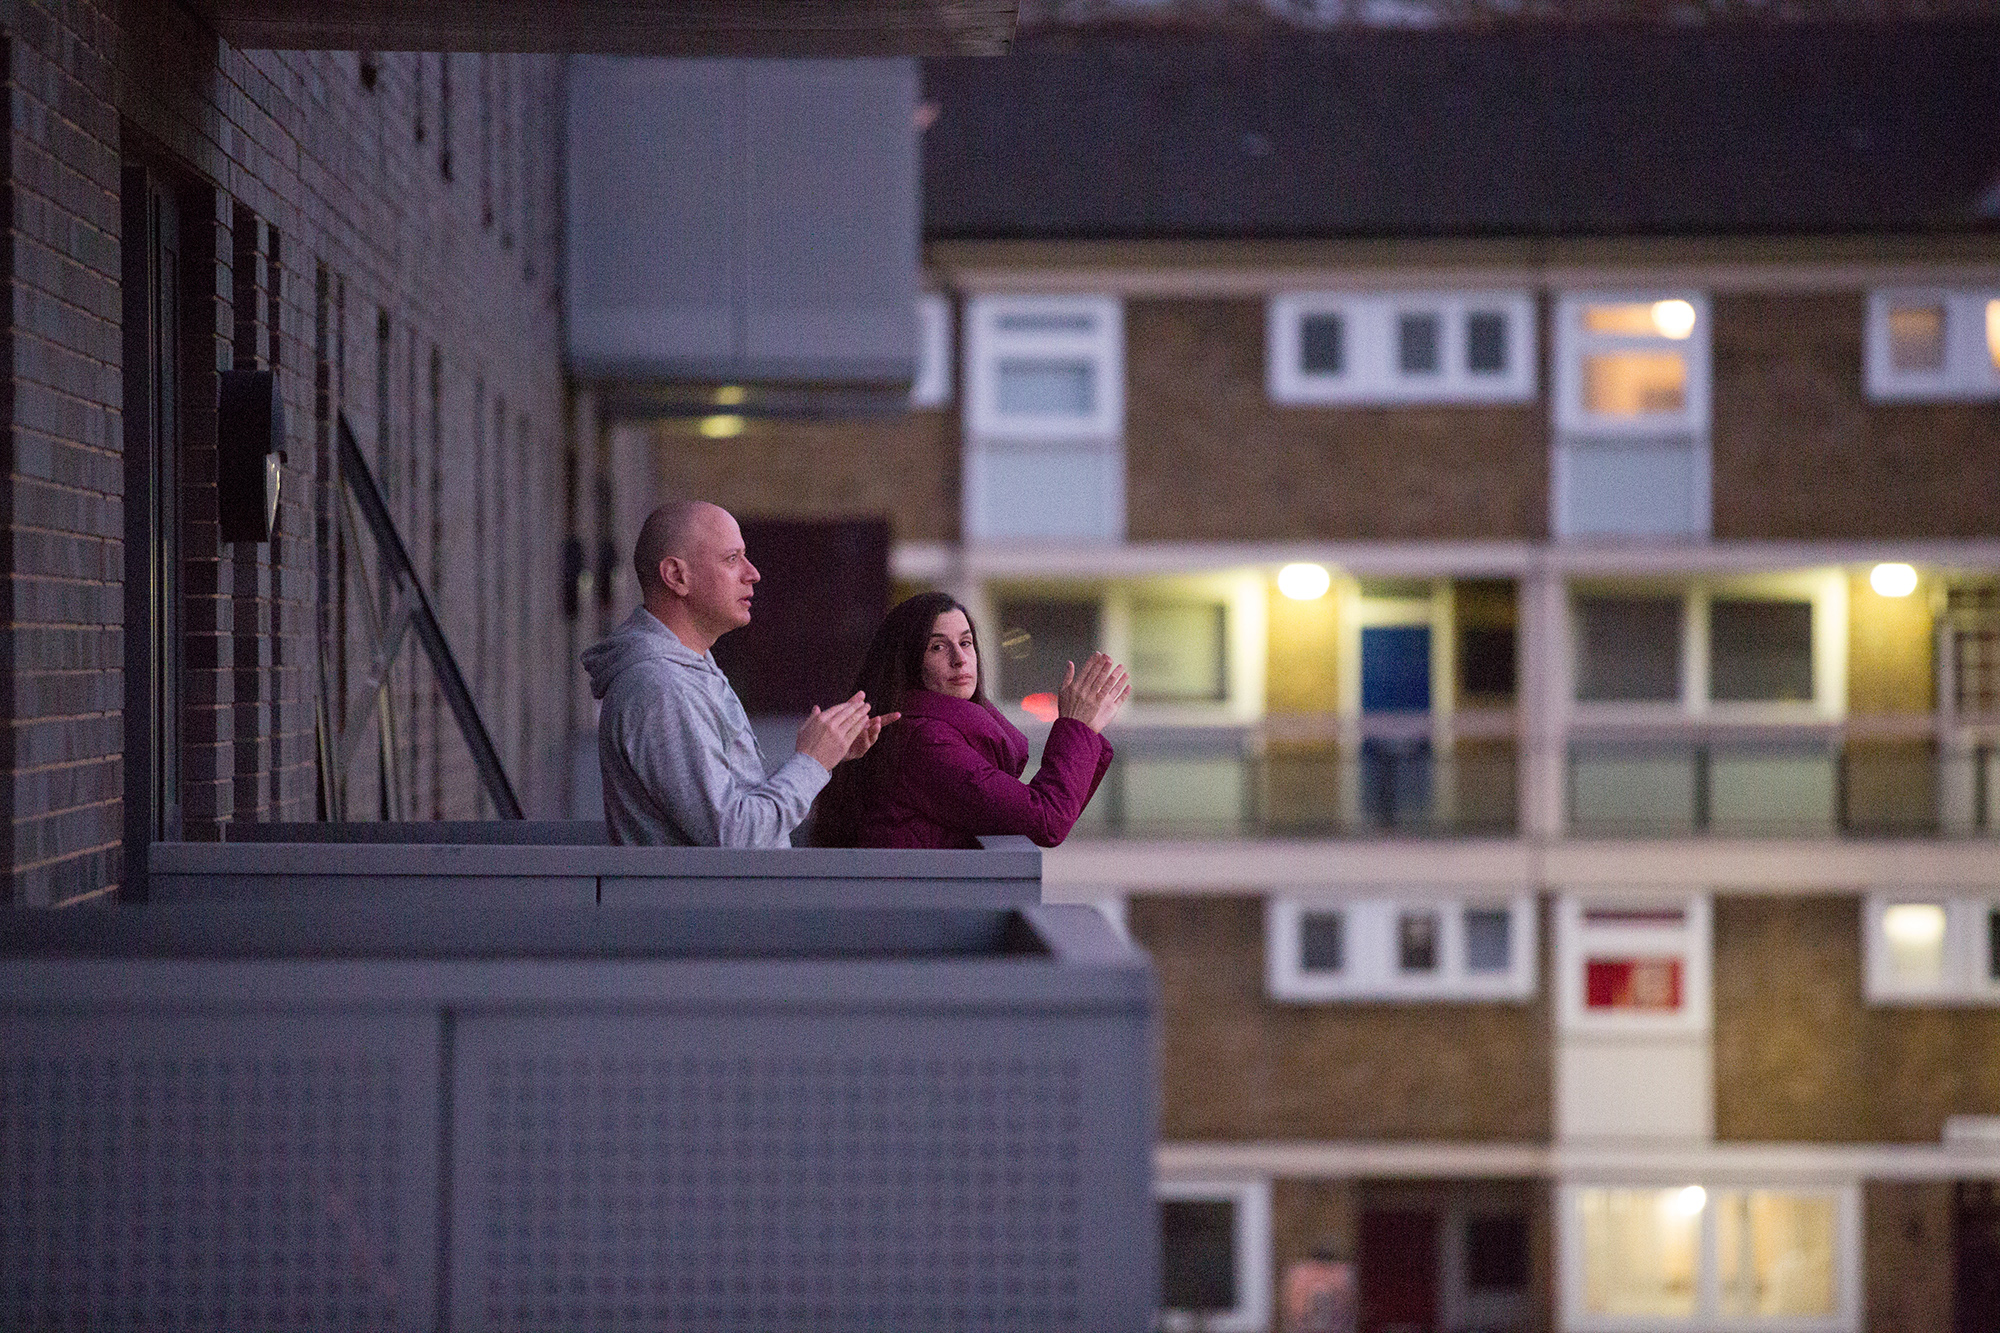 Man and woman standing on the balcony of a block of flats clapping their hands